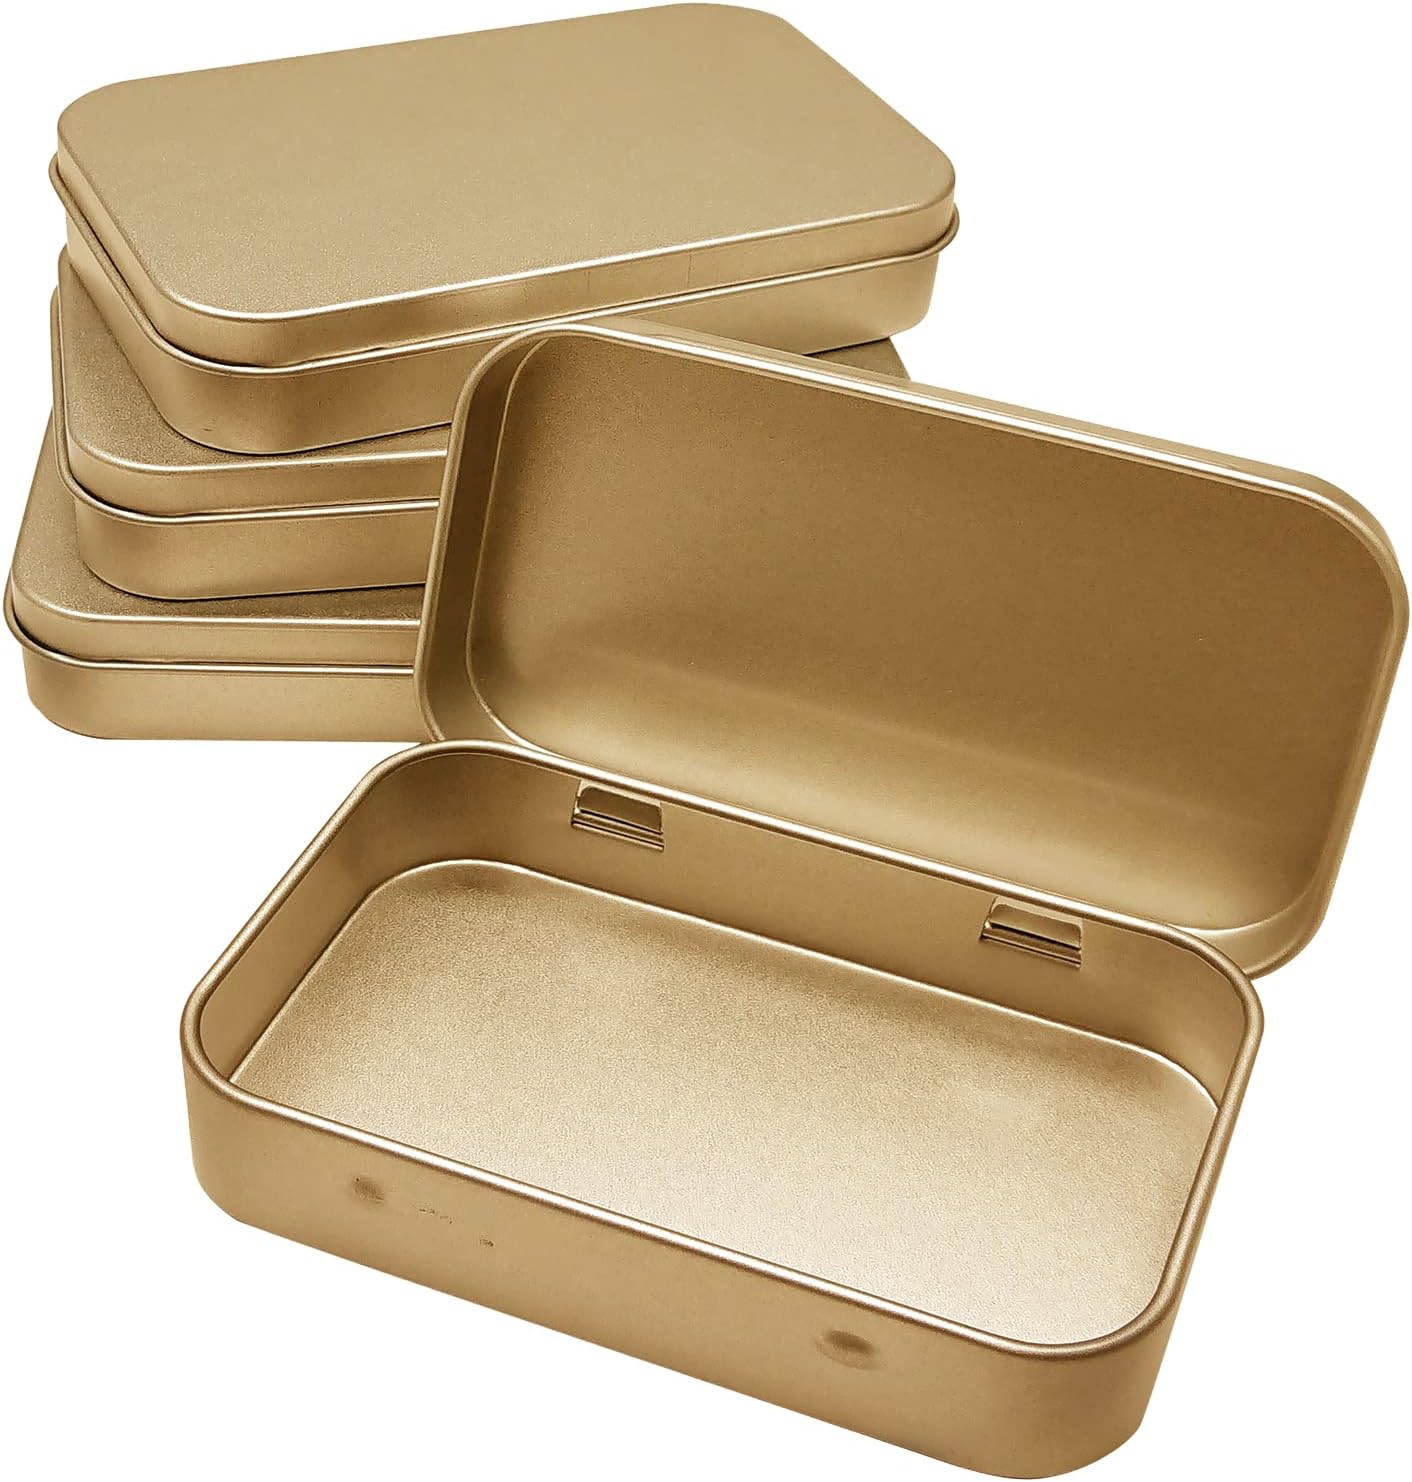 4 Pcs Jewelry Storage Cases Iron Cookie Container Tinplate Empty Tins Travel